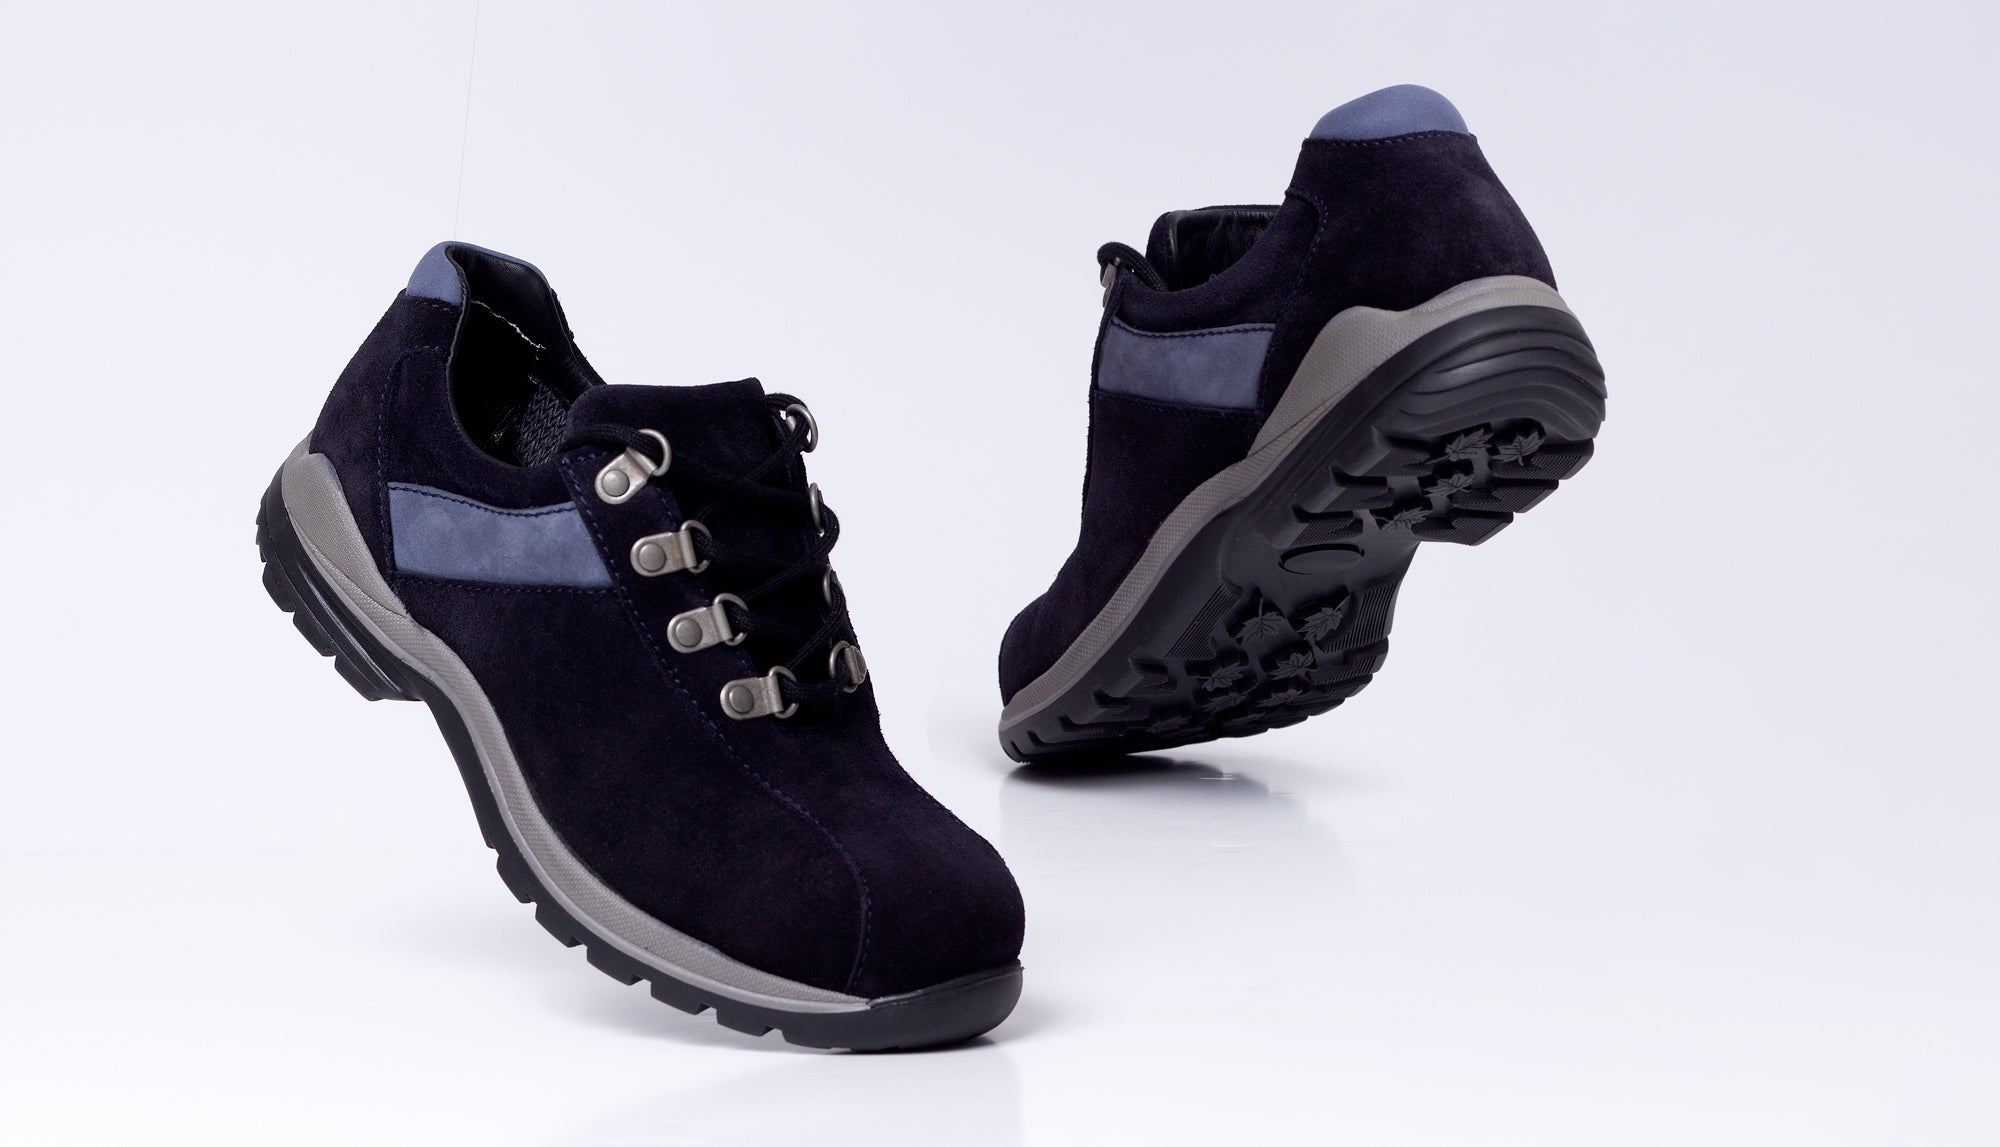 Wide Fit Shoes - Extra Wider Fitting Footwear For Men And Women